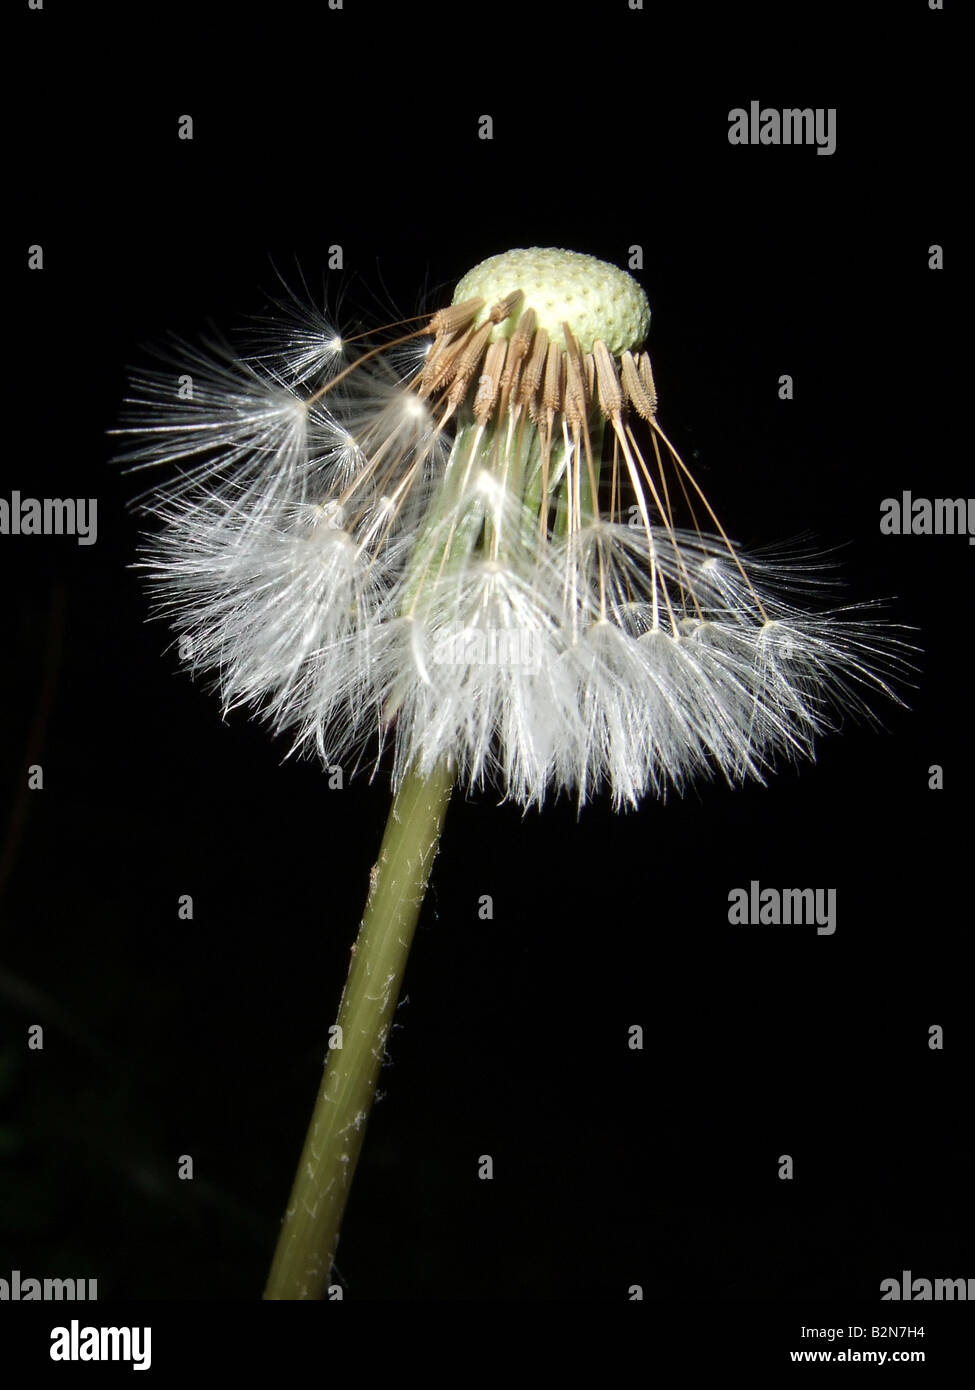 Night time dandelion clock with silky white tufts on black background. A striking contrasting image. Stock Photo